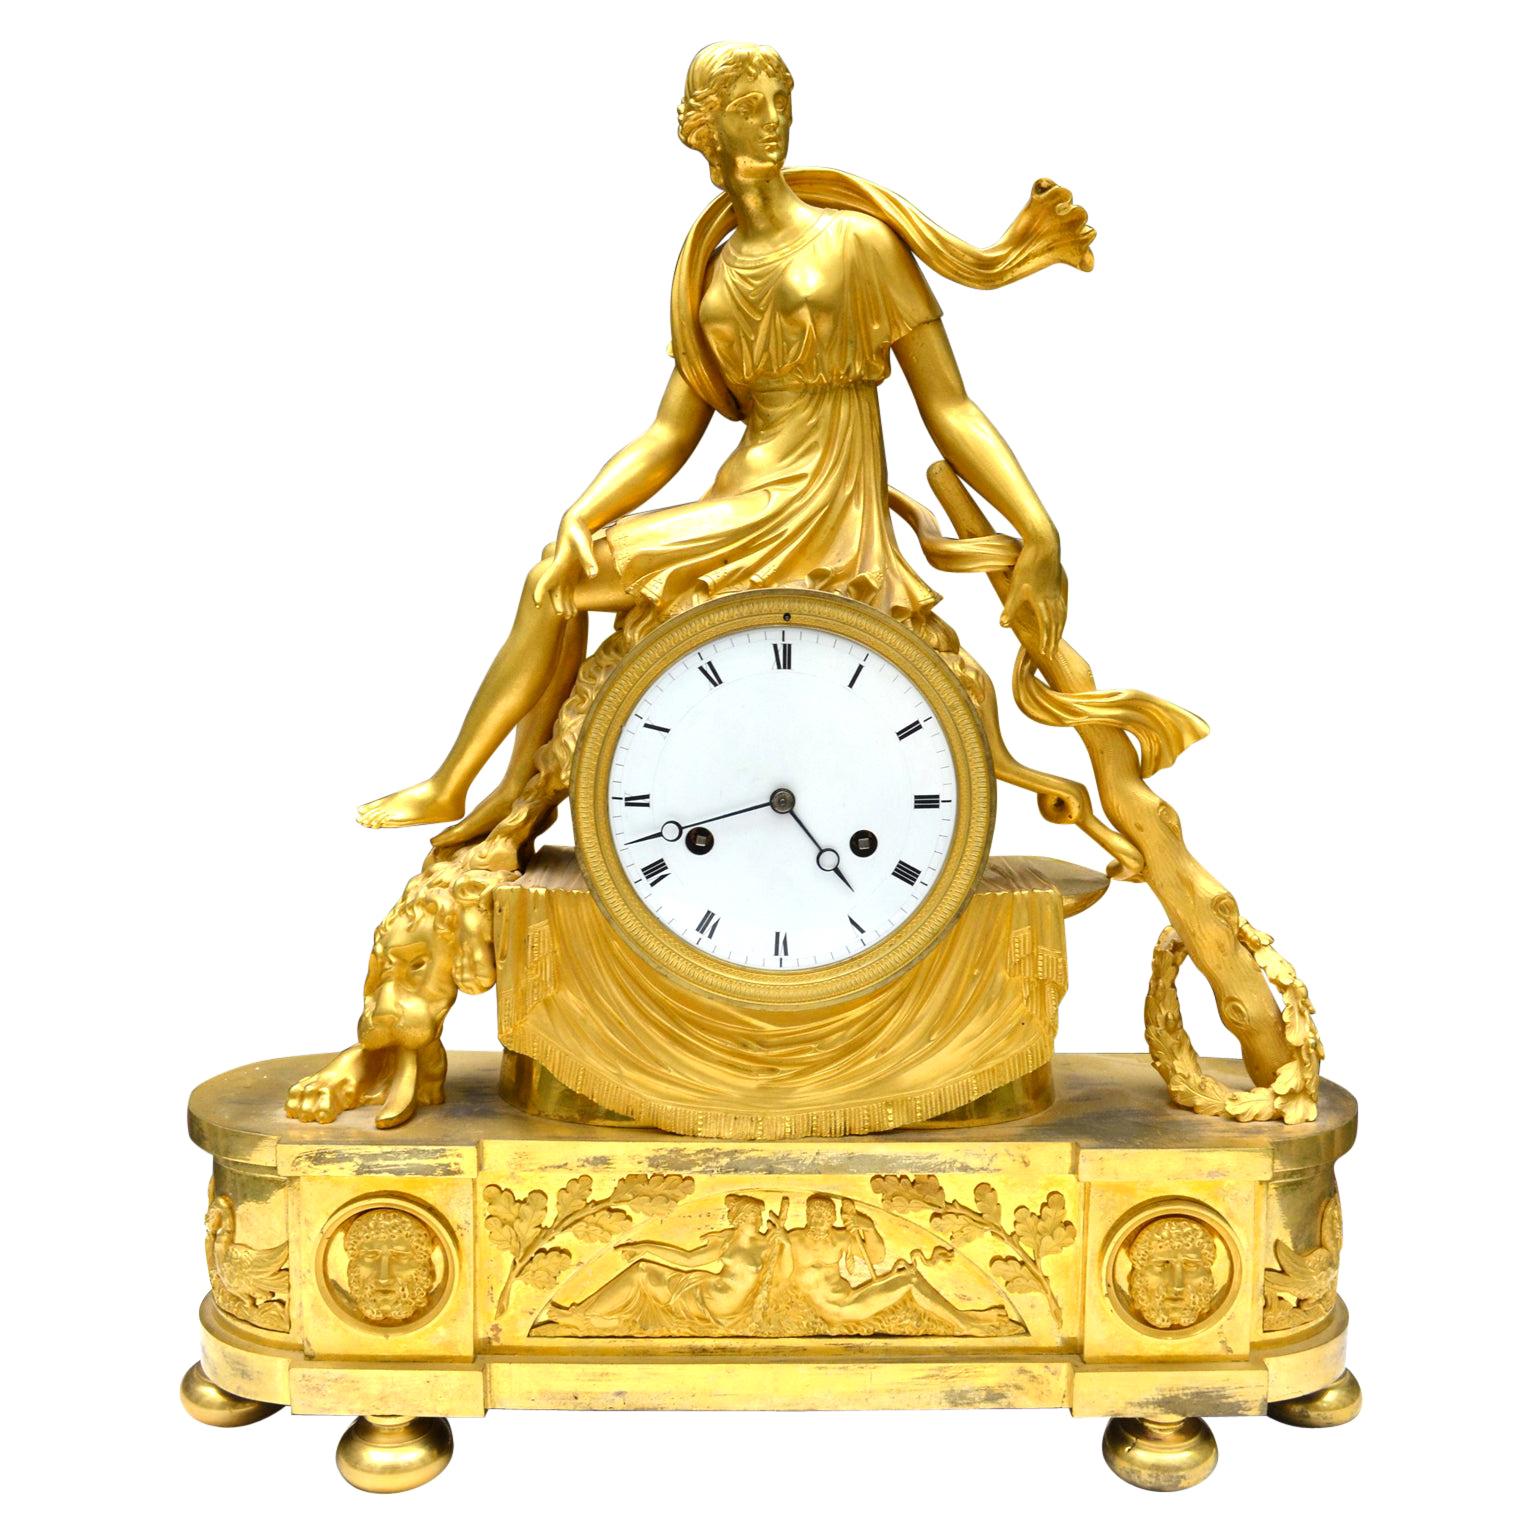 An early 19 century French Empire gilt bronze clock depicting the mythological Lydian Queen Omphale sitting astride on a draped drum that contains the clock's dial and the movement. Omphale is shown with the Nemean Lion's fleece at her feet on one